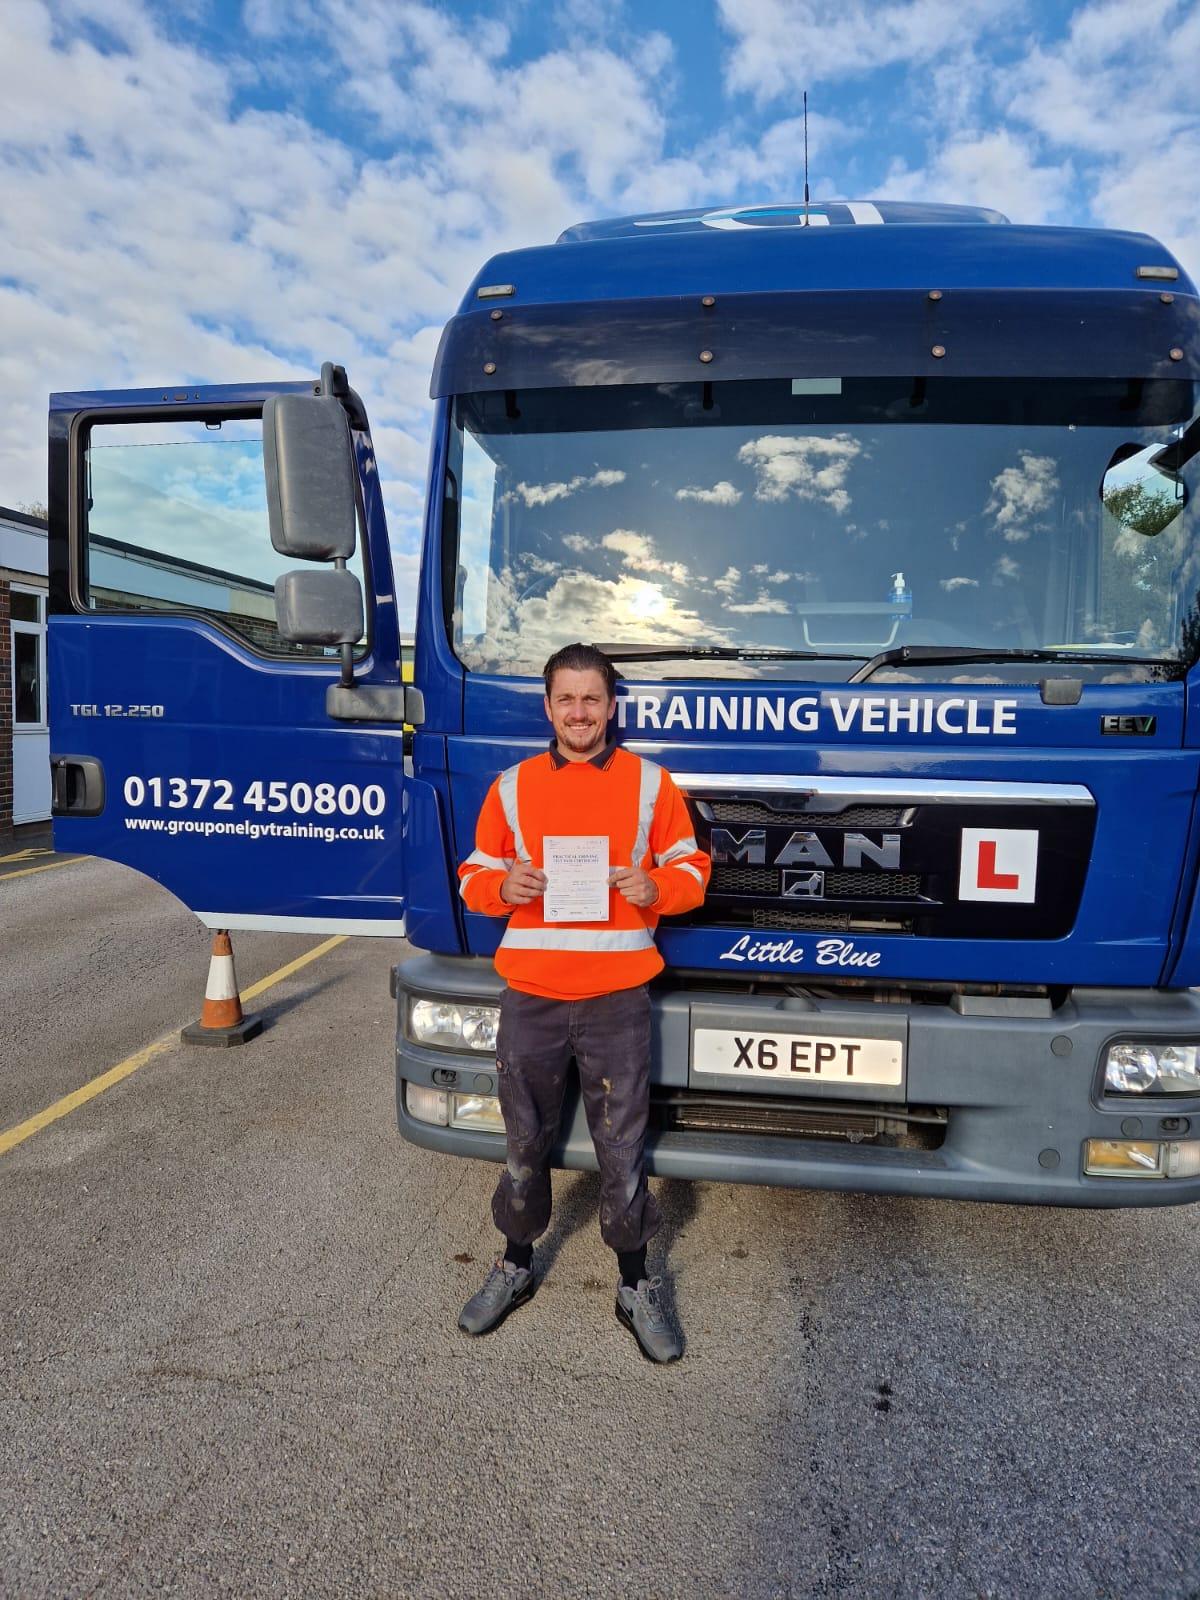 Our Danny having passed his HGV Licence – Nice one Danny!